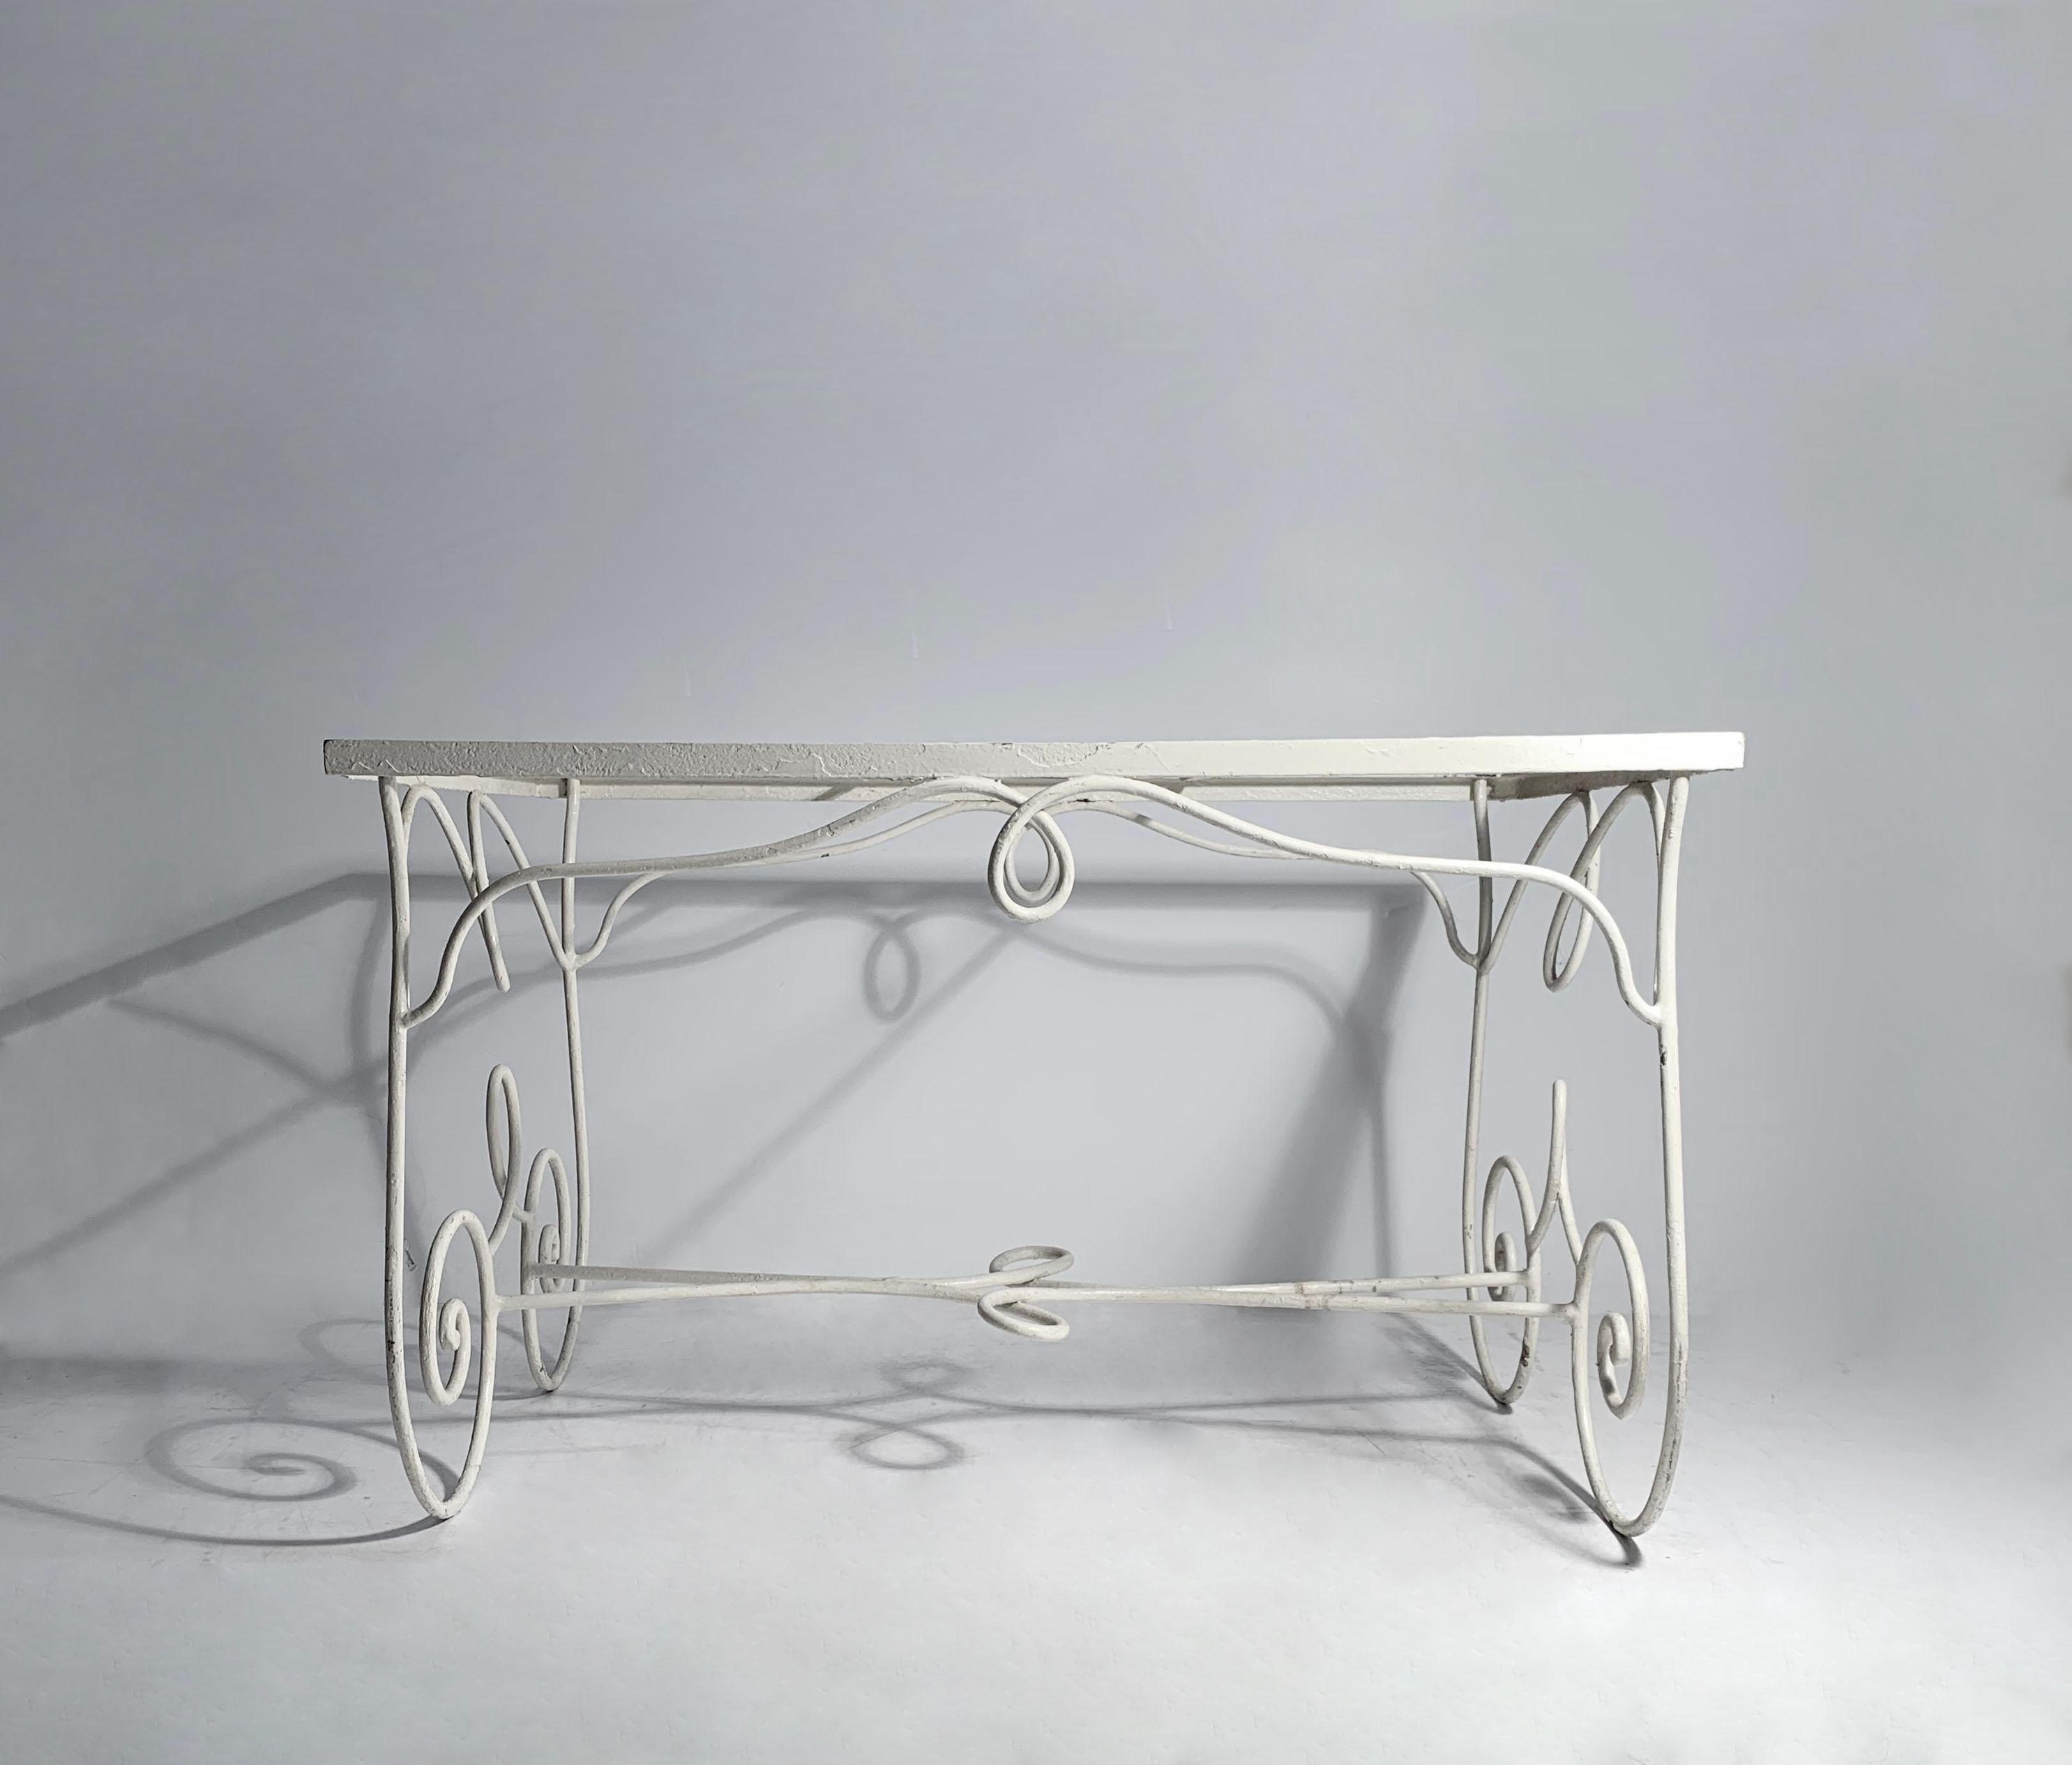 Vintage French Wrought Iron Garden Dining Table Base Attributed to Rene Prou. Sophisticated & Artistic design of the period.